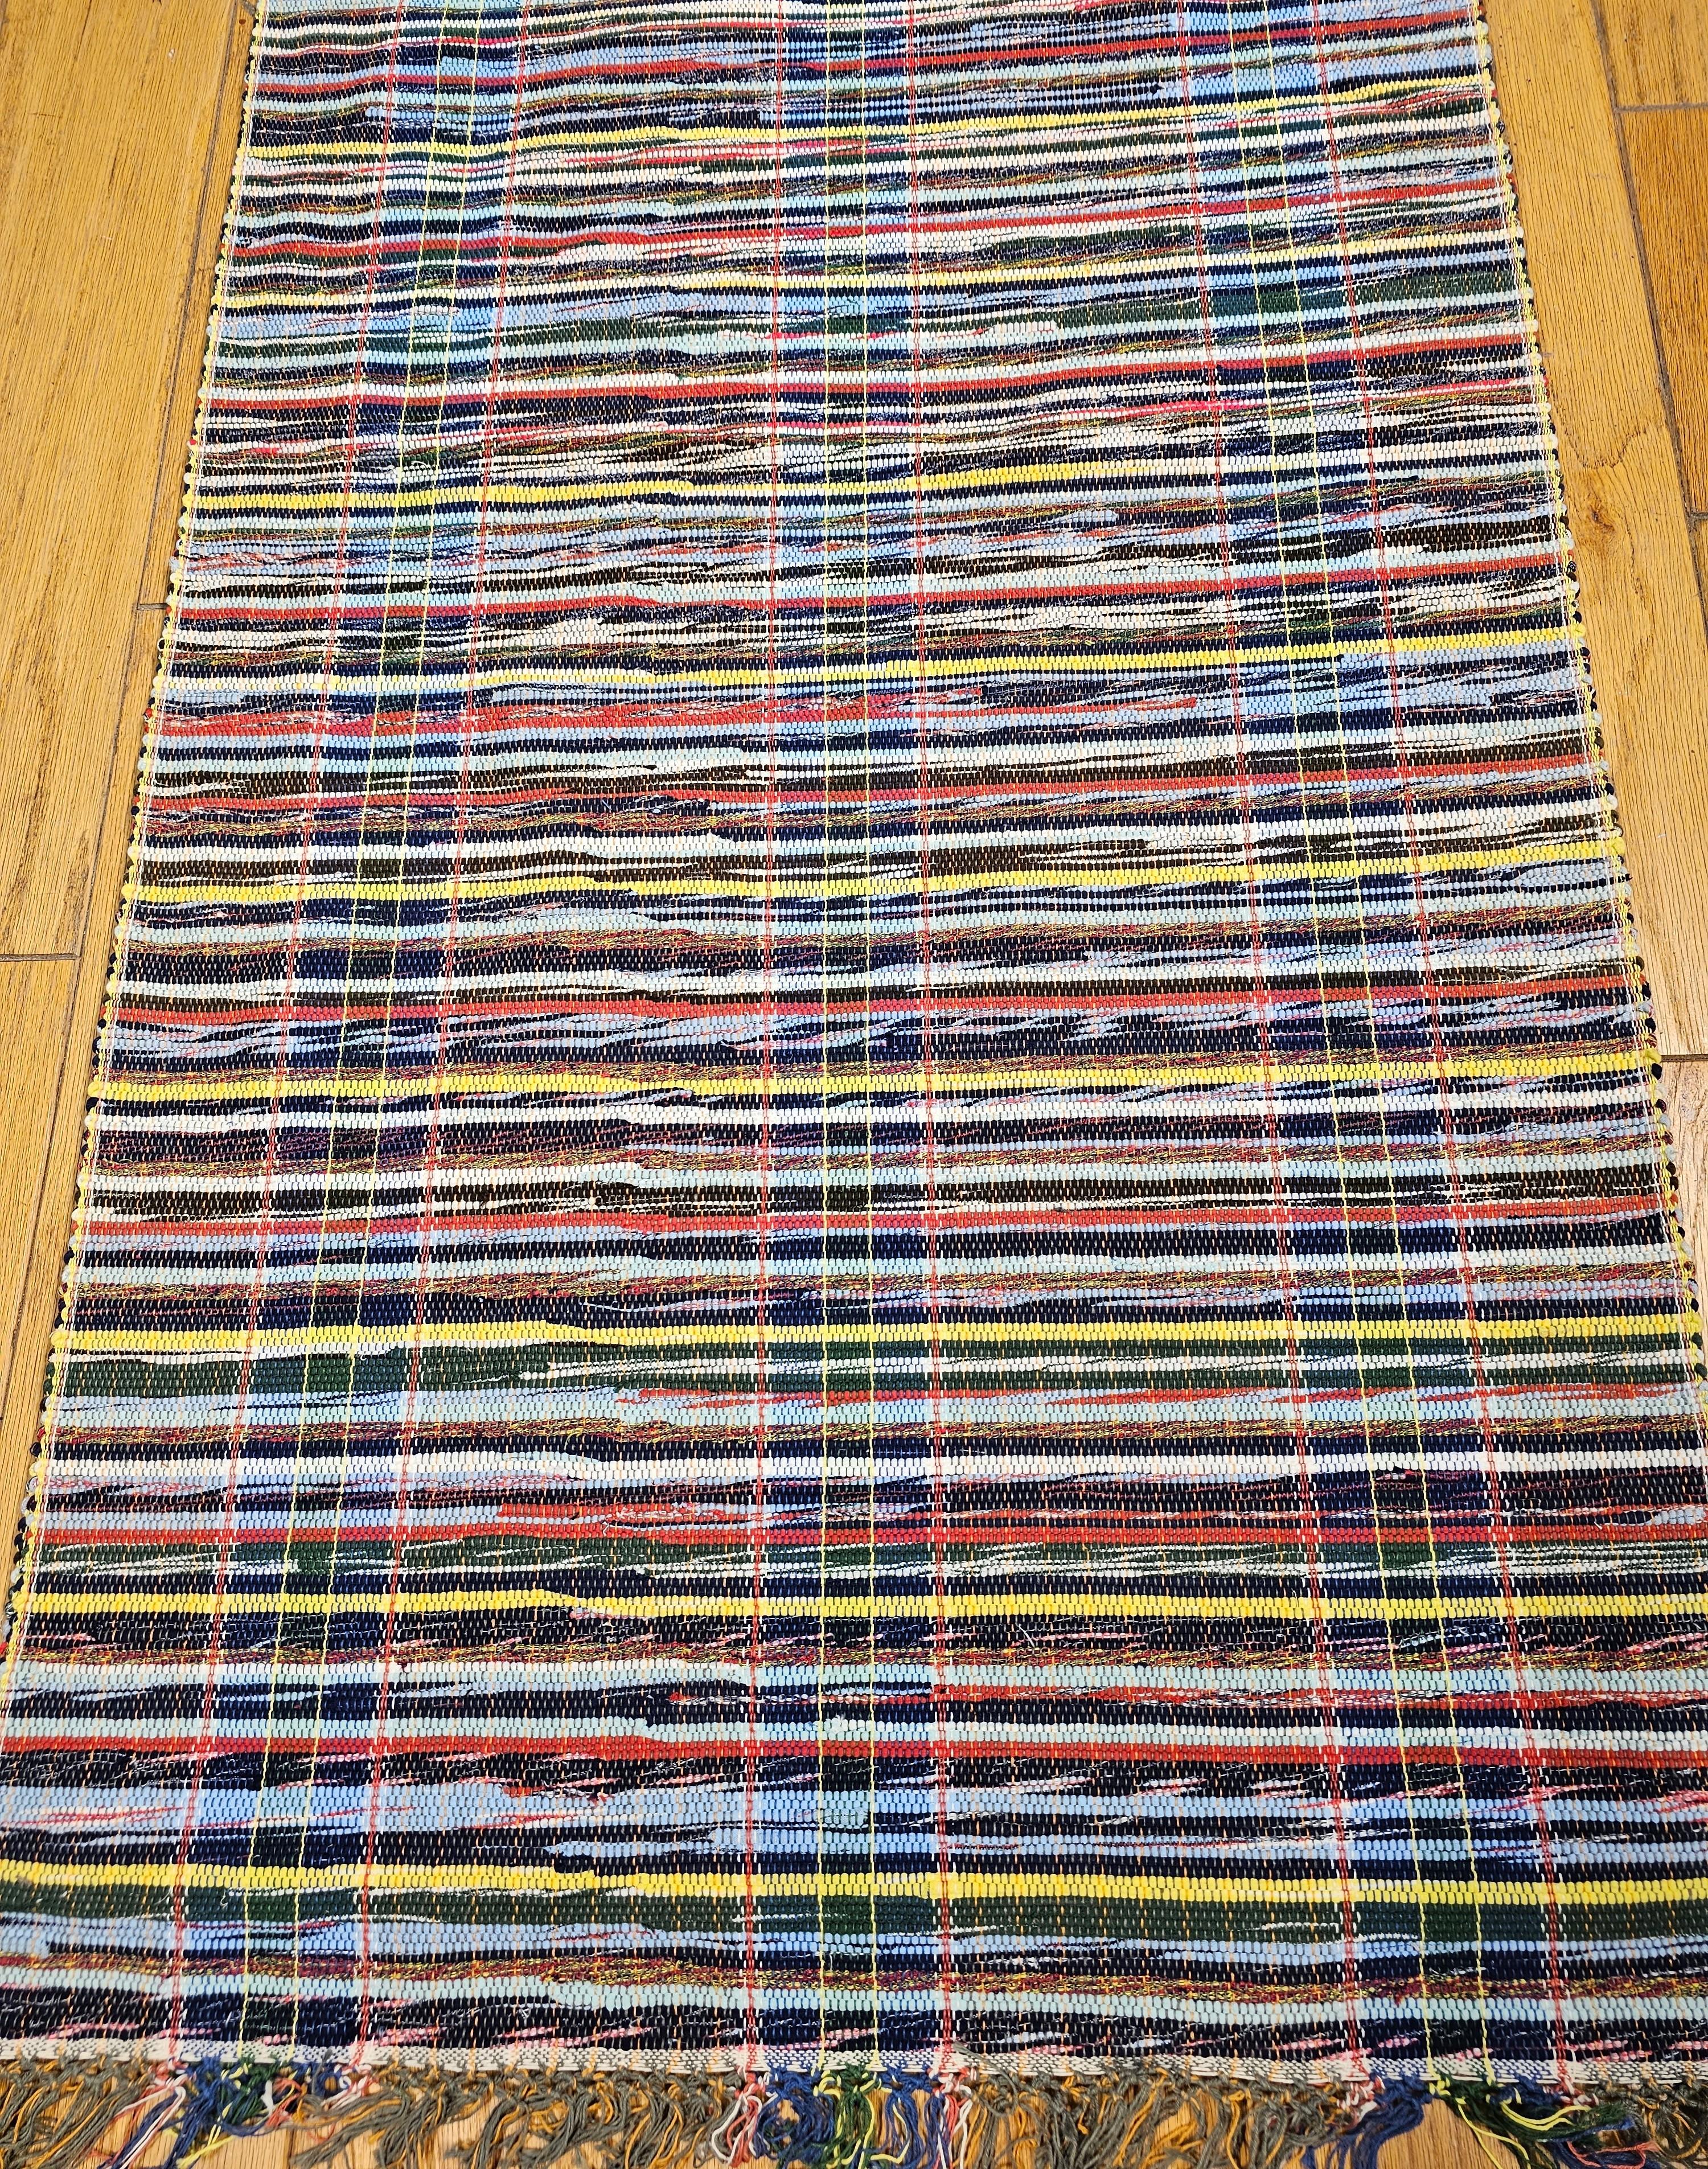 Hand-Woven Vintage American Rag Long Runner in Stripe Pattern in Navy, Blue, Yellow, Red For Sale